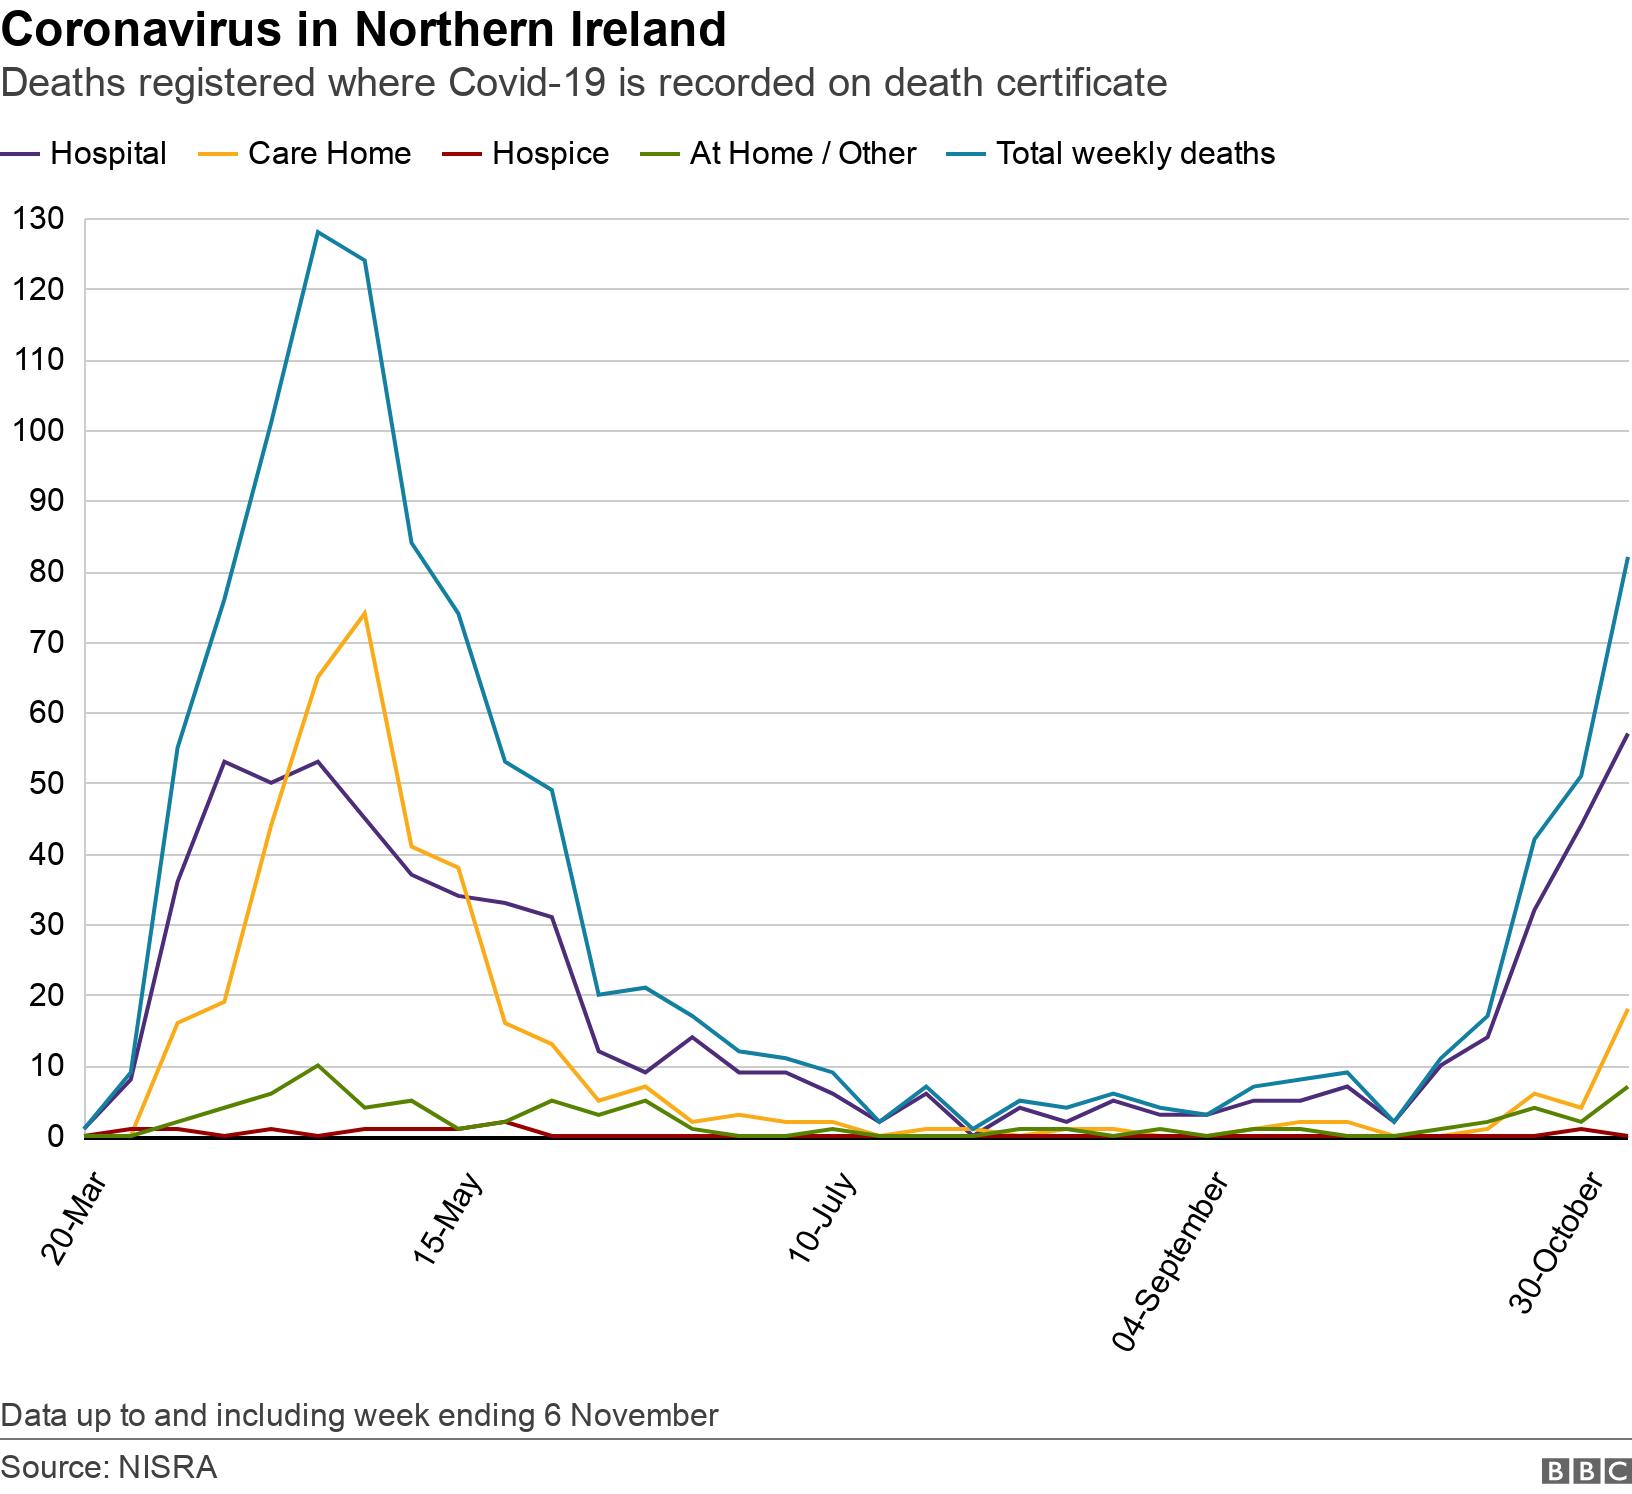 Coronavirus in Northern Ireland. Deaths registered where Covid-19 is recorded on death certificate. Graph showing place of death over time Data up to and including week ending 6 November.